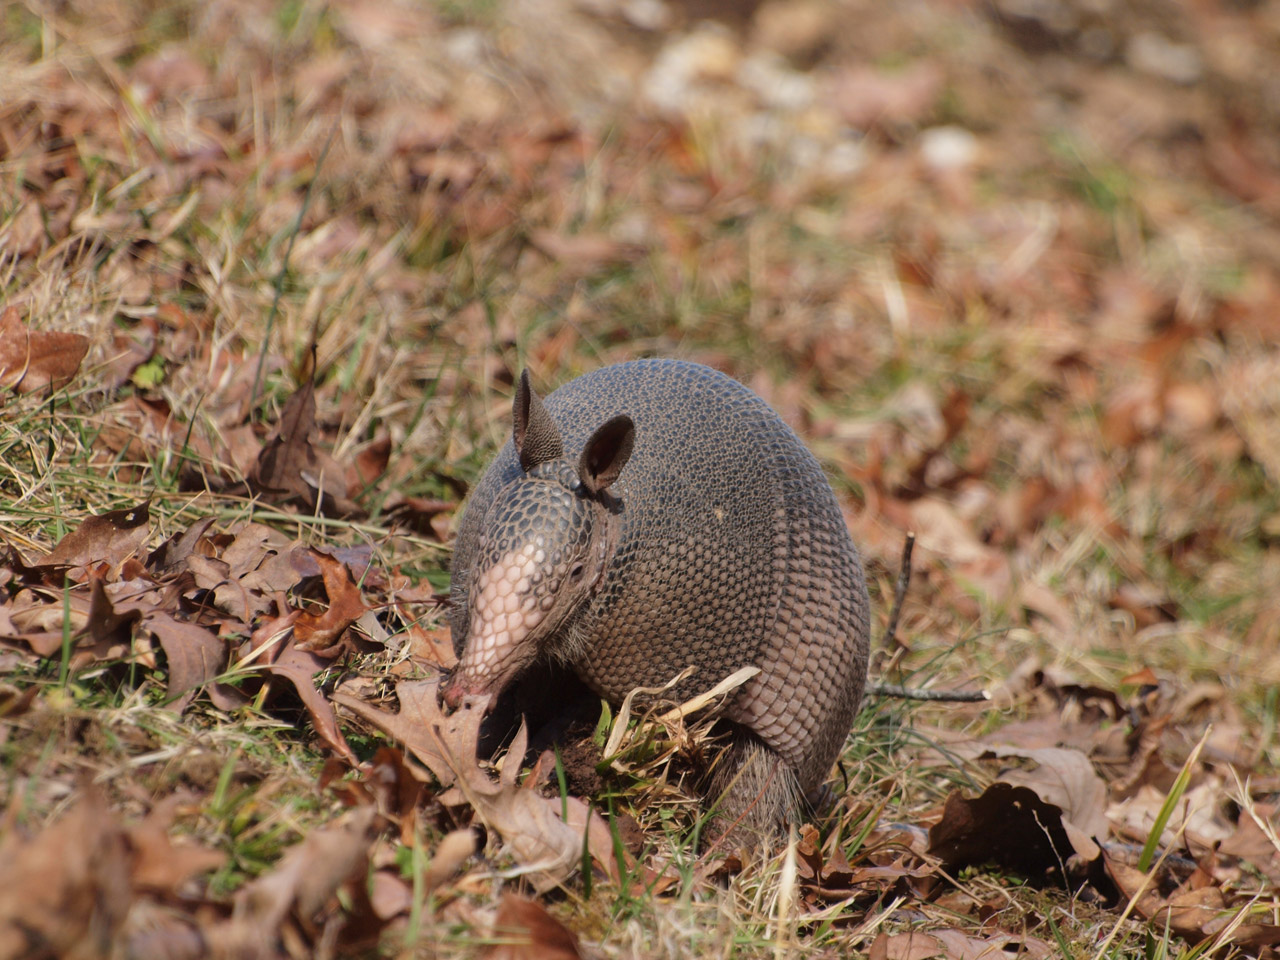 Armadillo eating along the Natchez Trace Parkway